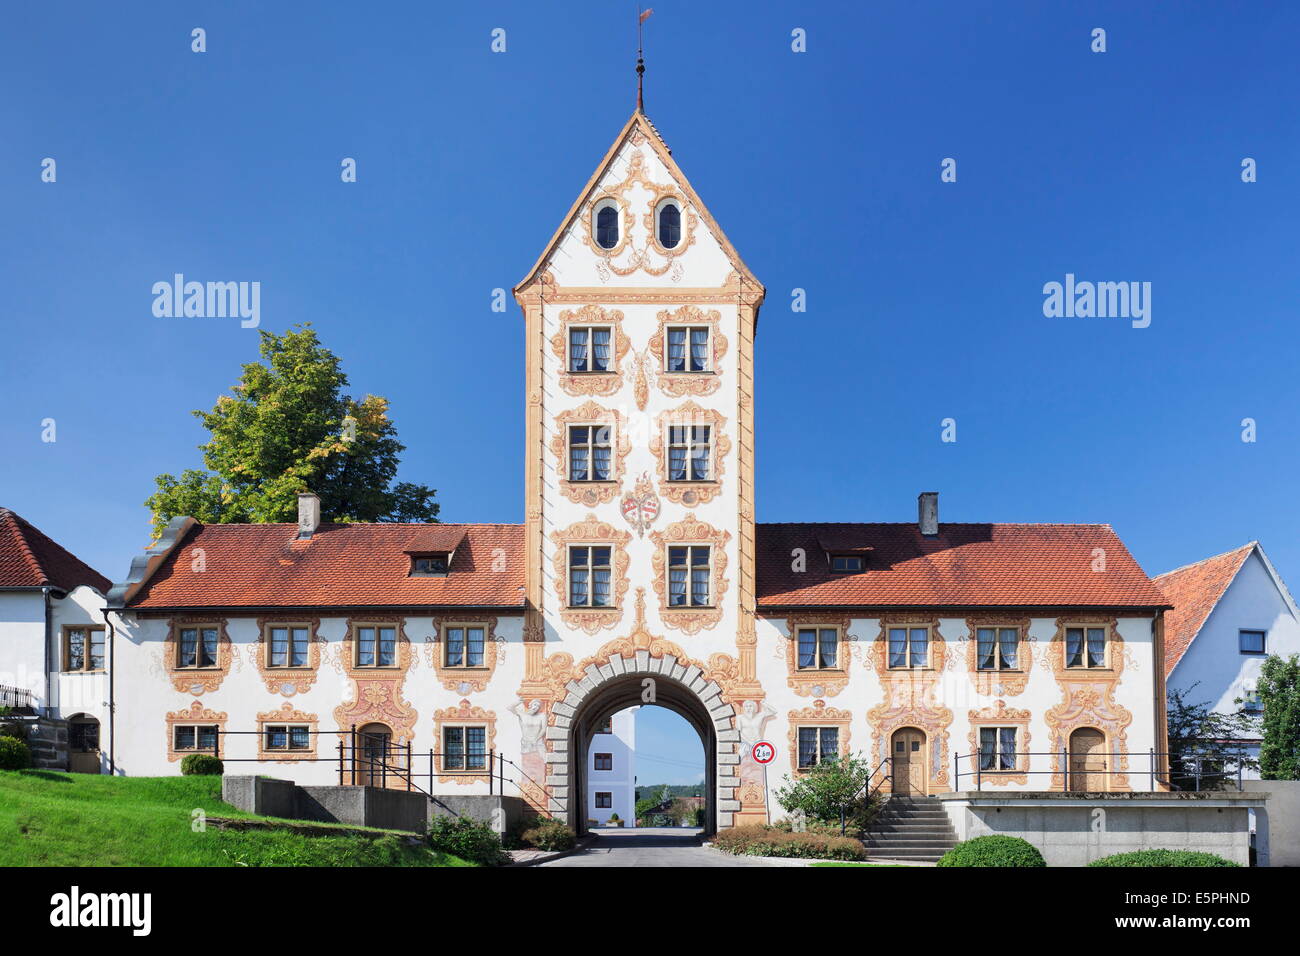 Oberes Tor Gate, Rot an der Rot, Suabia superior, Baden Wurttemberg, Alemania, Europa Foto de stock